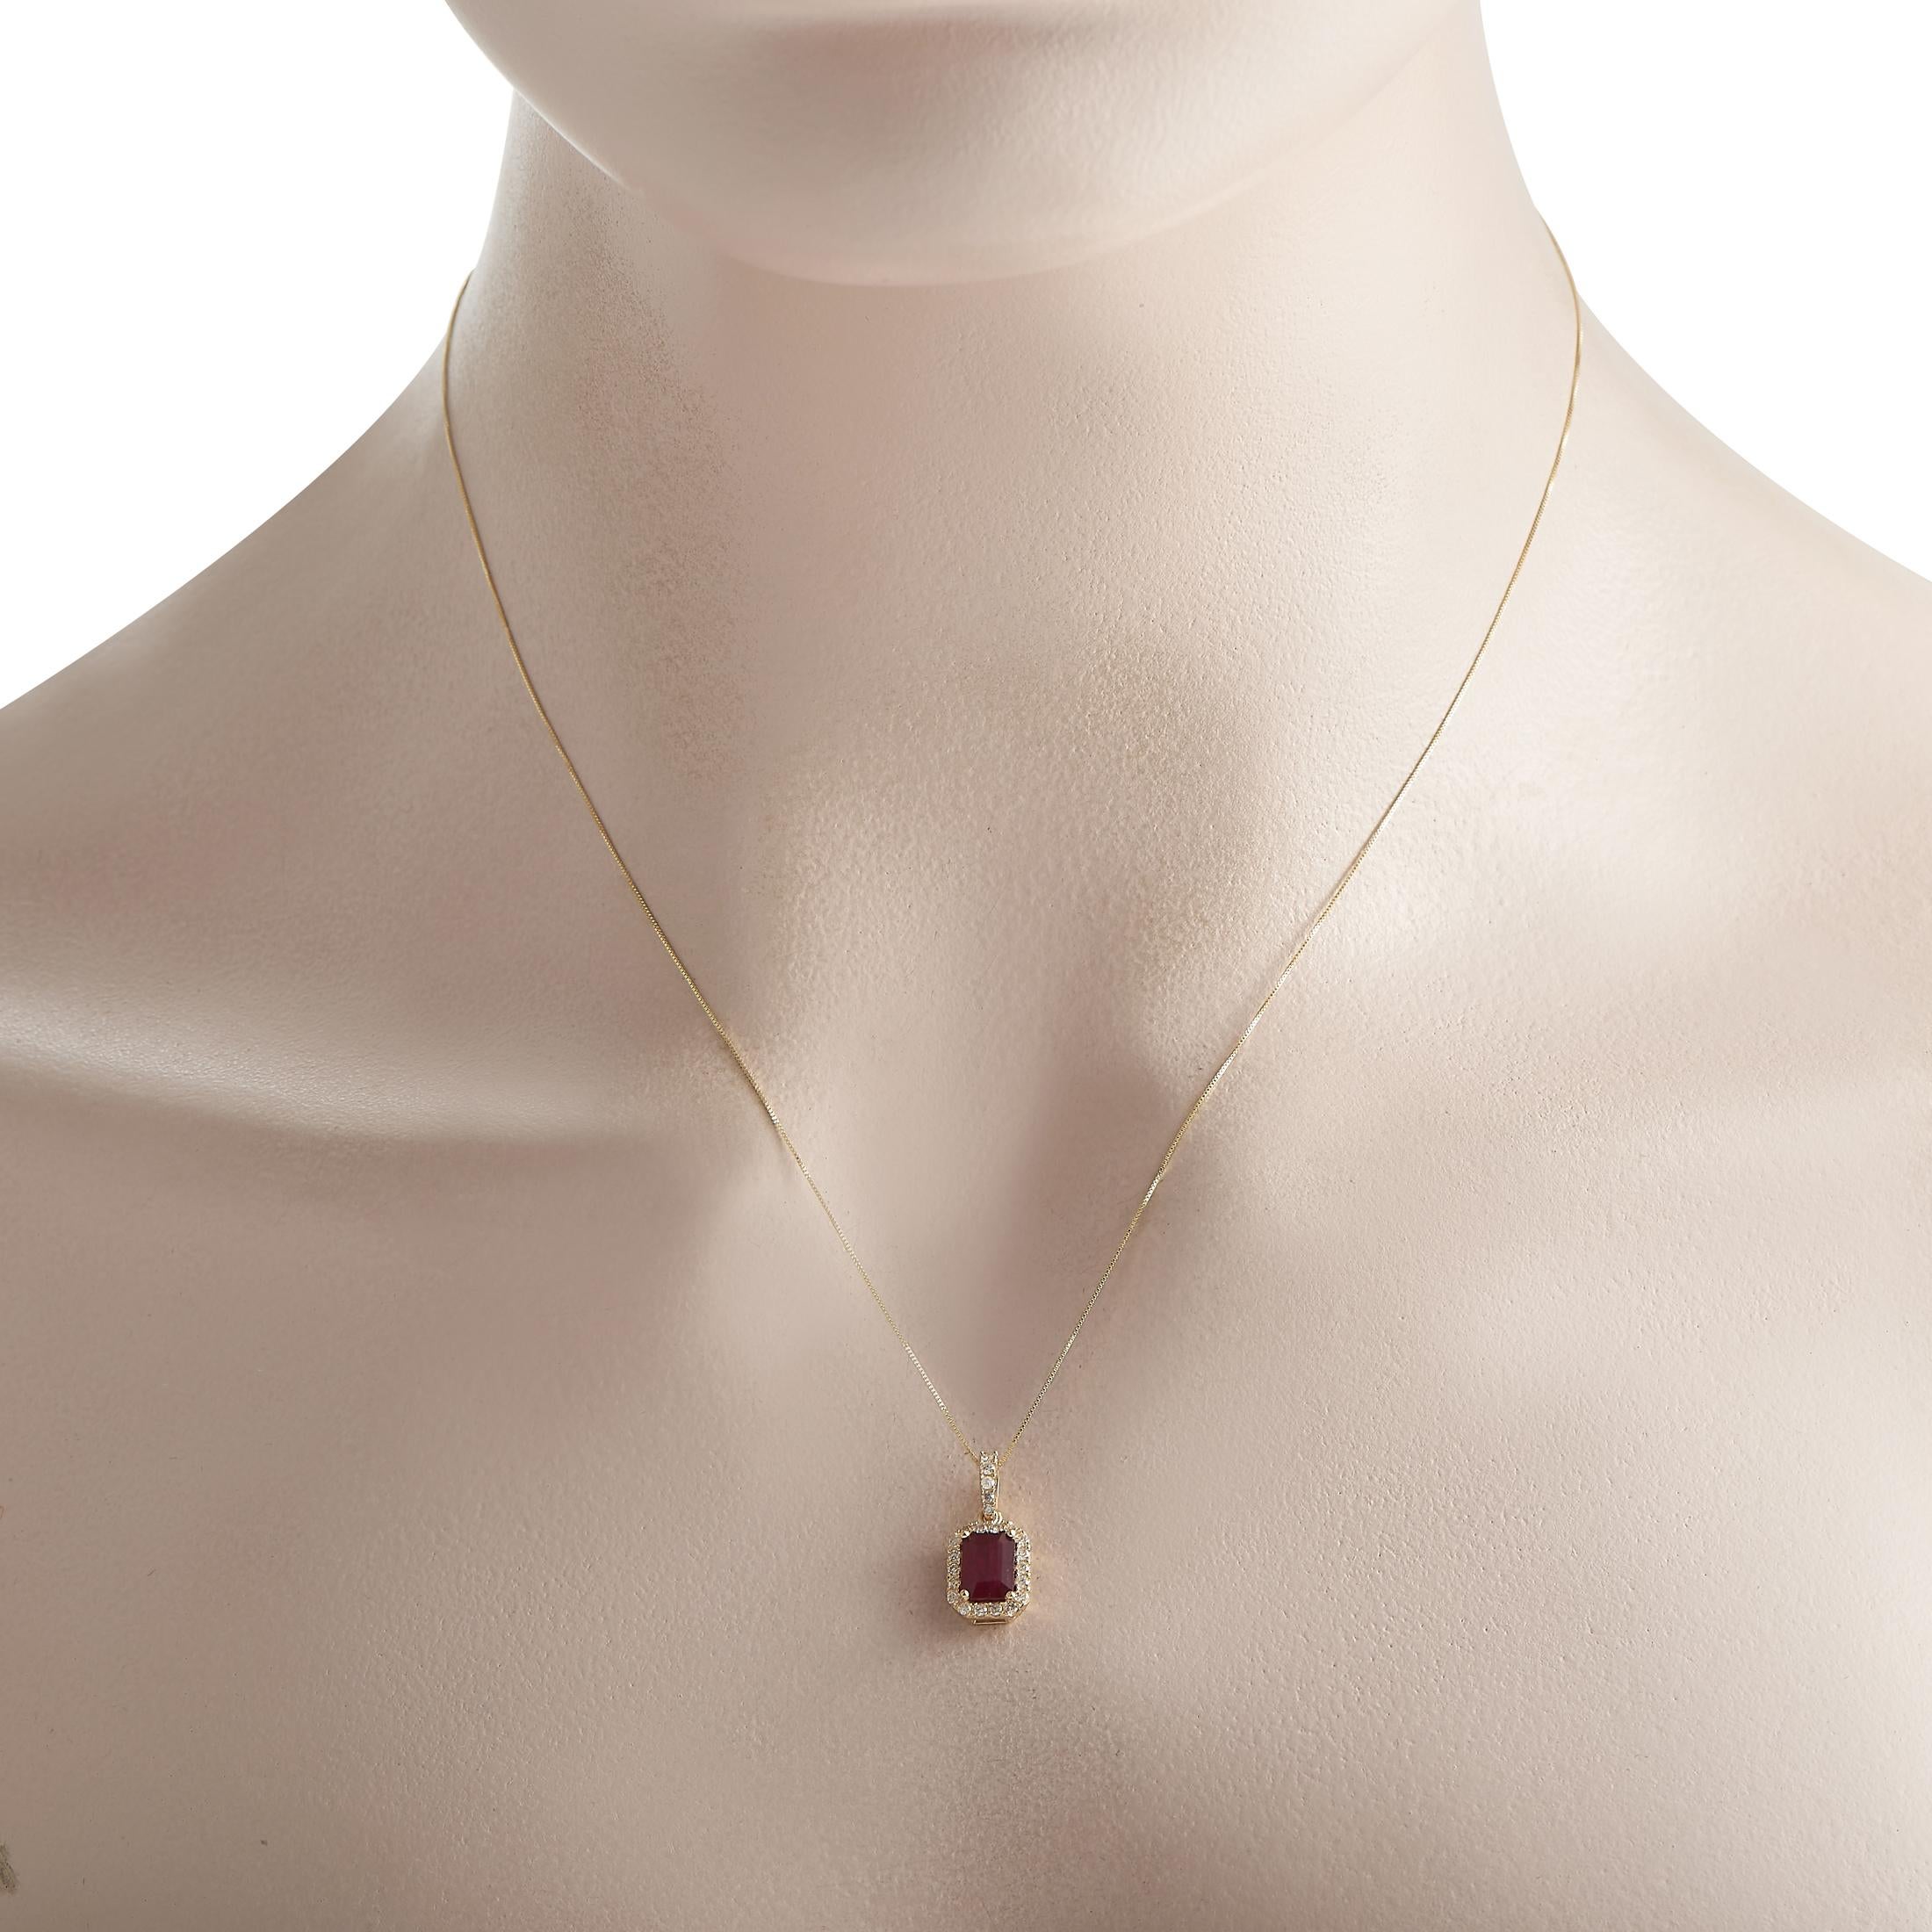 This necklace makes it easier to add a vintage flair to your looks. Crafted in 14K yellow gold, this LB Exclusive necklace has a 1.28 carat step-cut ruby pendant surrounded by 0.20 carats of round diamonds. It is held by a diamond-traced bail on an